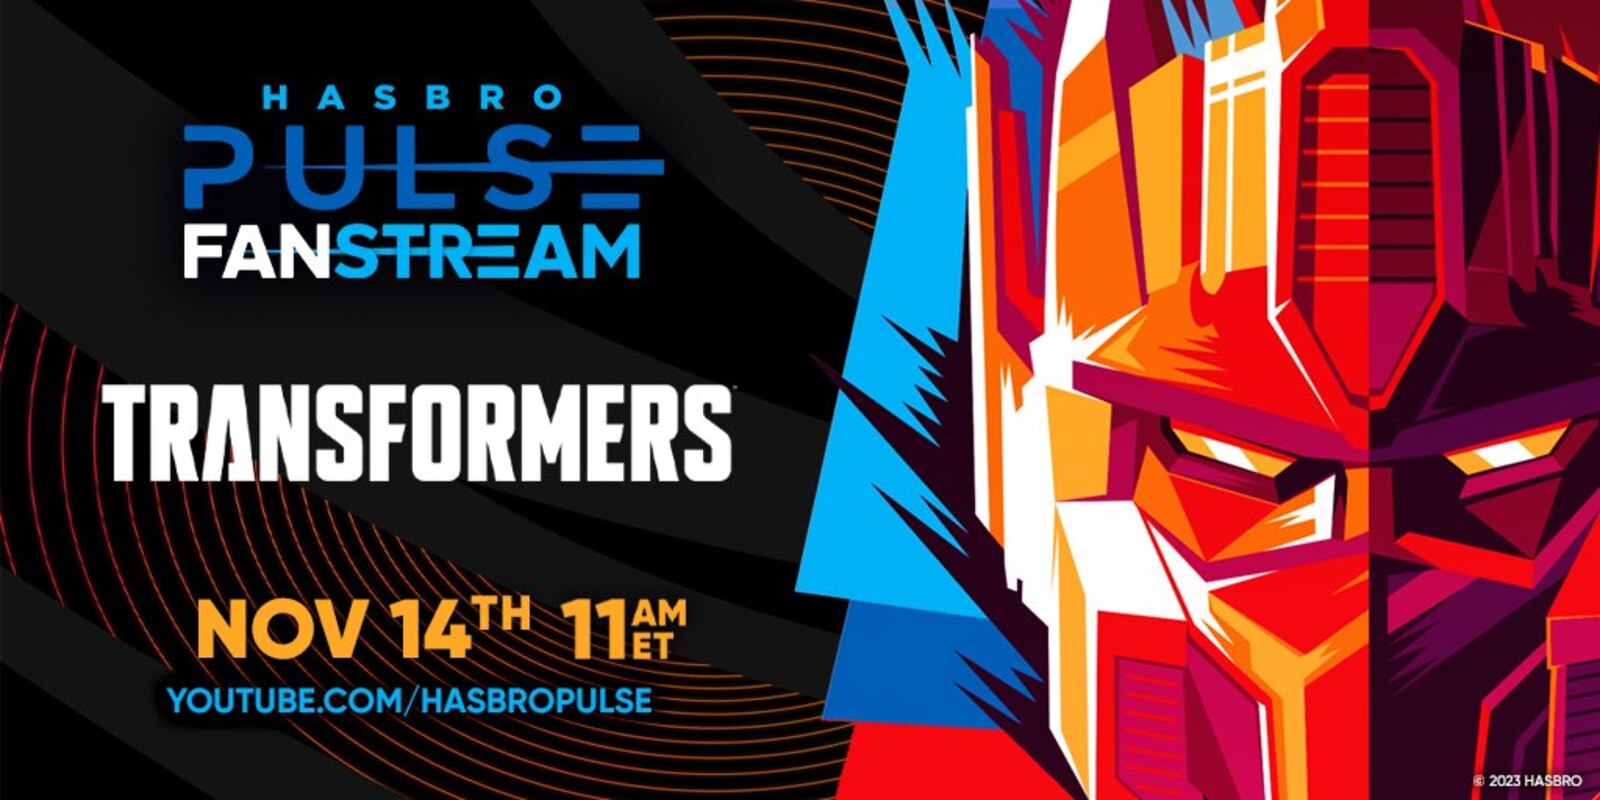 New Transformers Fanstream Event Coming November 14th - Rise Up and Game Out!